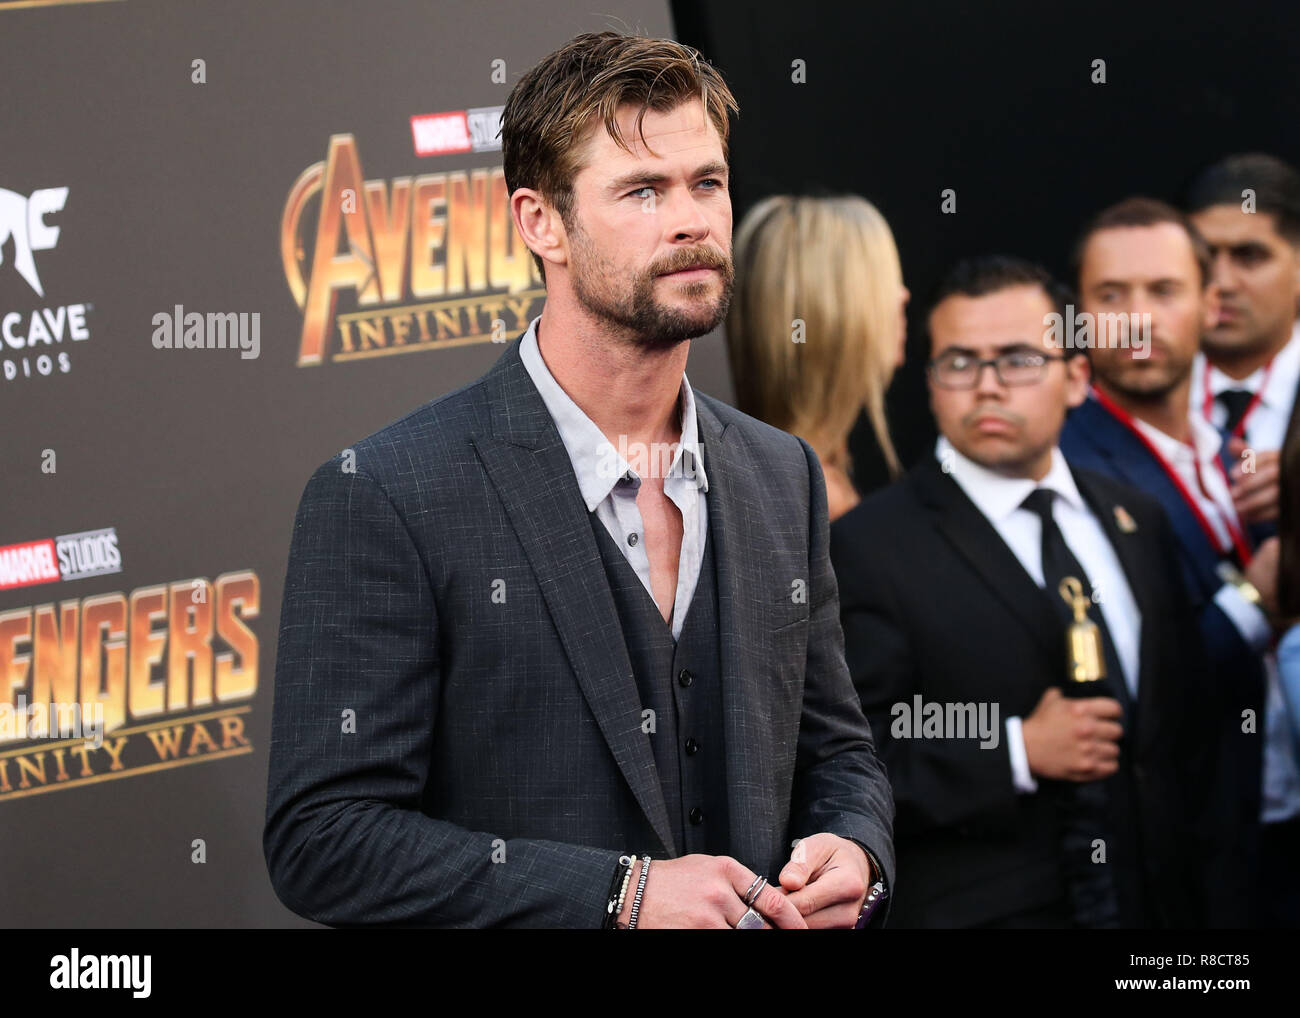 HOLLYWOOD, LOS ANGELES, CA, USA - APRIL 23: Chris Hemsworth at the World Premiere Of Disney And Marvel's 'Avengers: Infinity War' held at the El Capitan Theatre, Dolby Theatre and TCL Chinese Theatre IMAX on April 23, 2018 in Hollywood, Los Angeles, California, United States. (Photo by Xavier Collin/Image Press Agency) Stock Photo